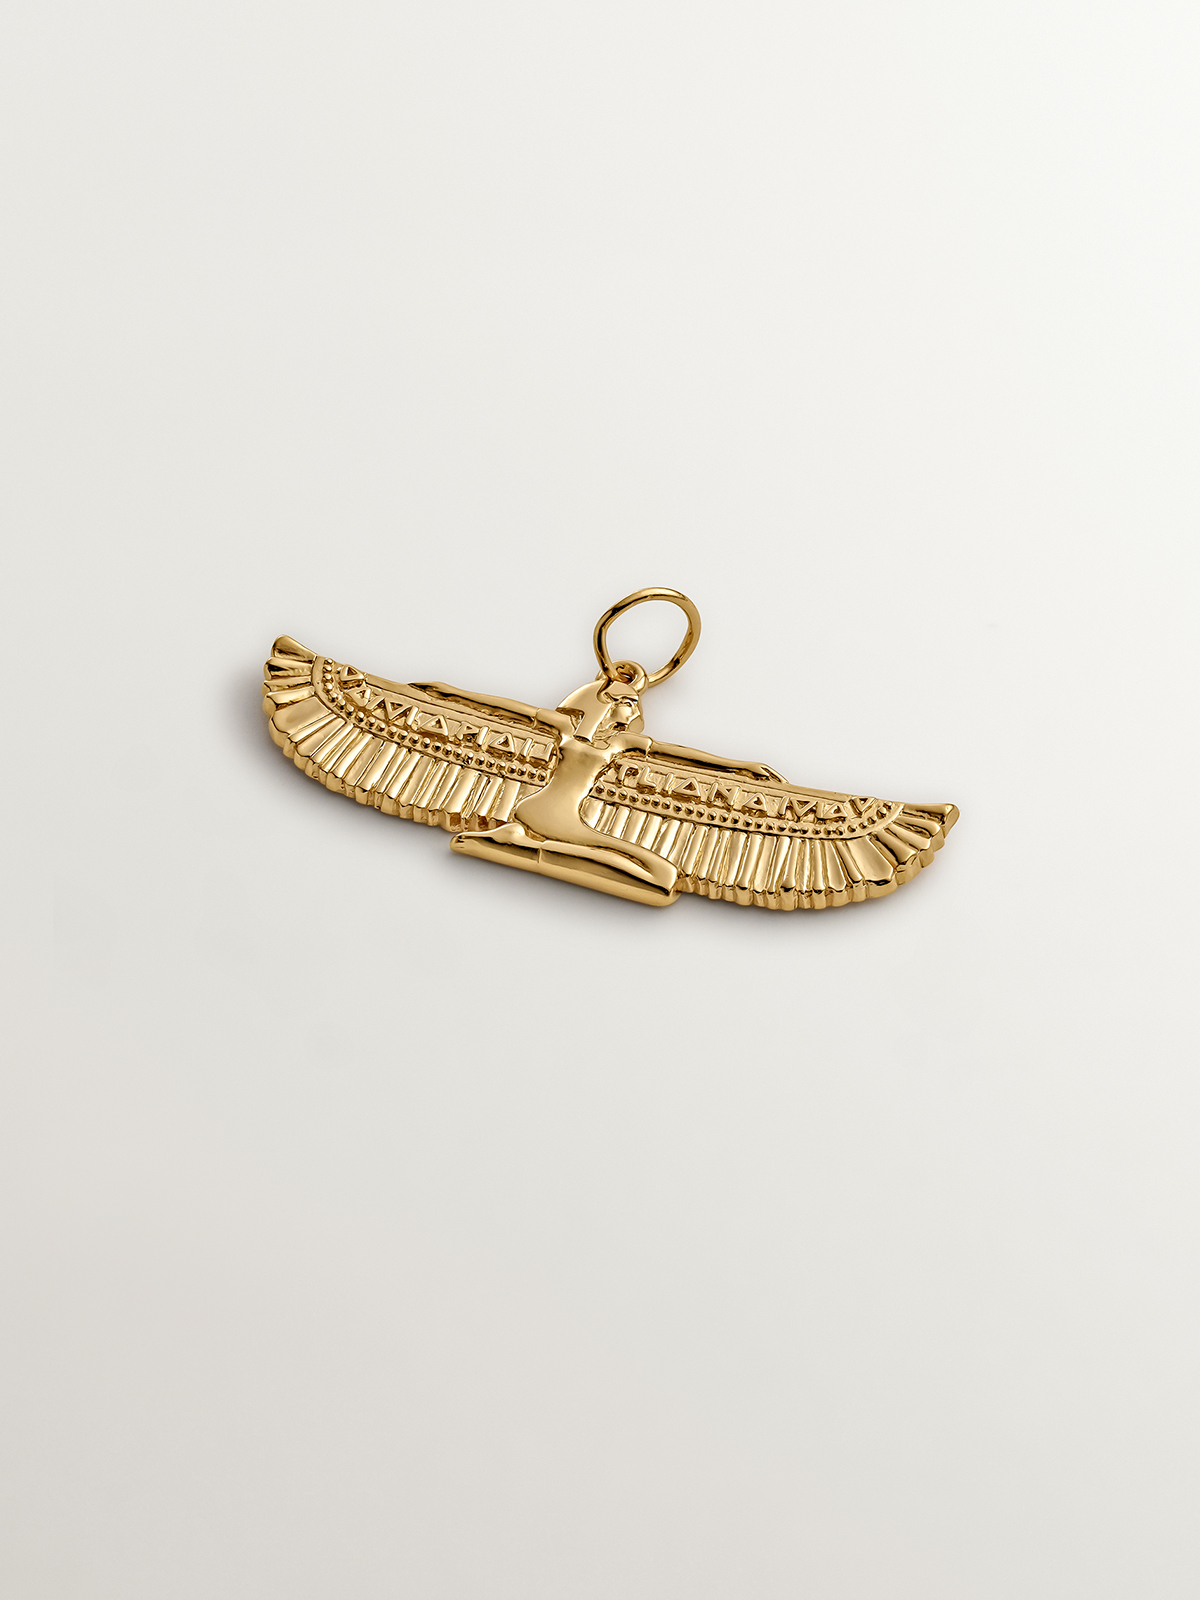 925 silver charm coated in 18K yellow gold with winged goddess